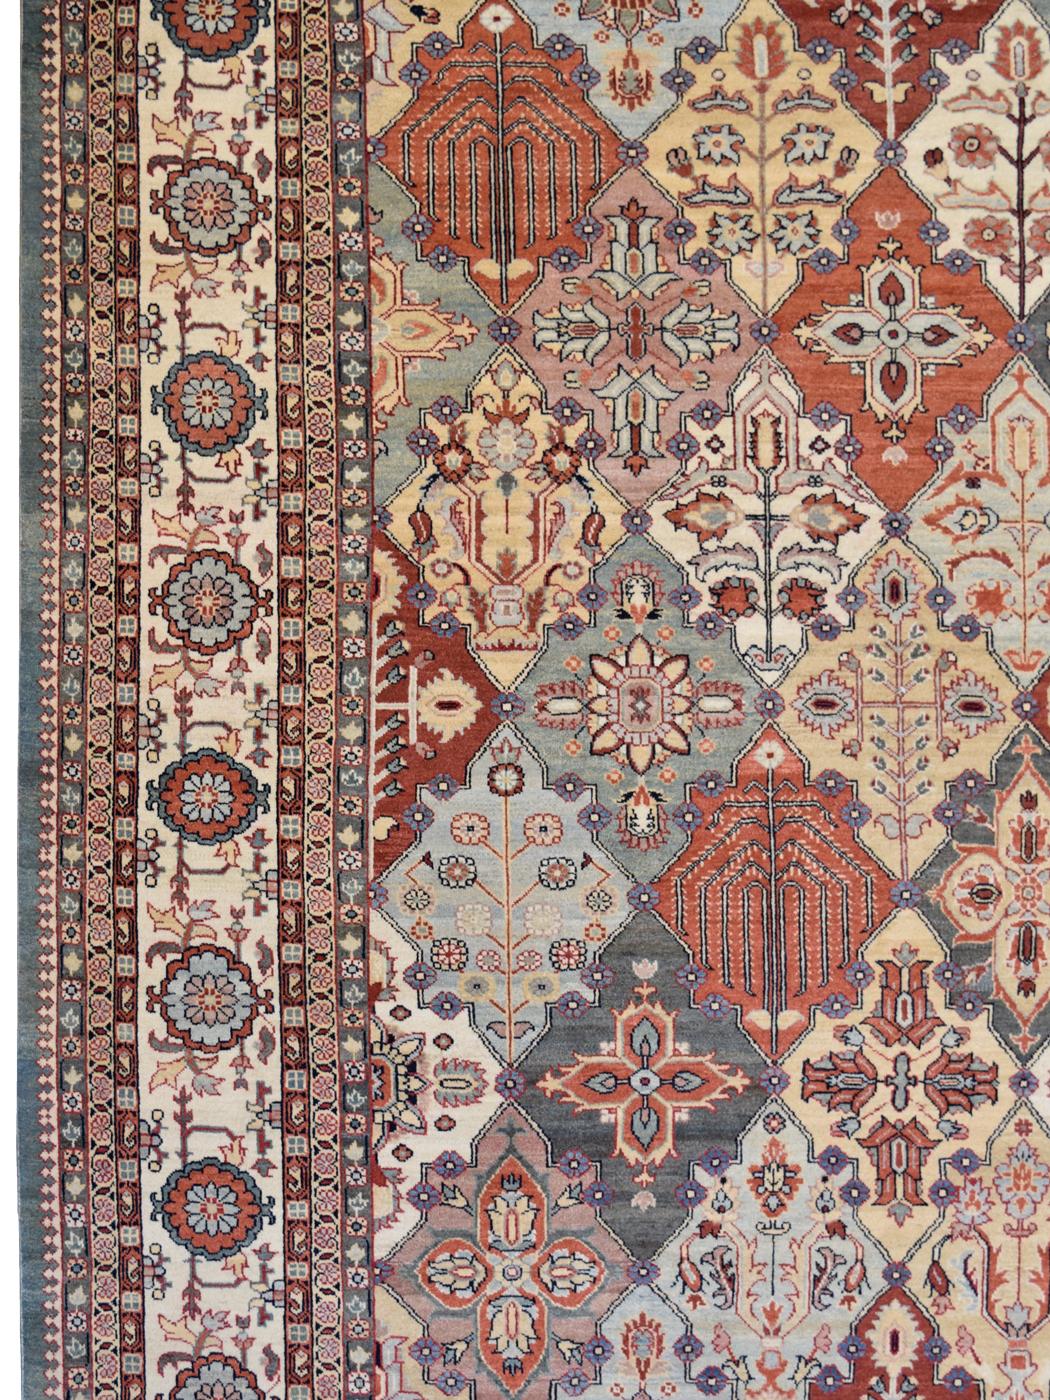 Hand-Knotted Wool, Persian Bakhtiari Carpet, Cream, Blue, Orange, Red, 10’ x 13’ For Sale 2